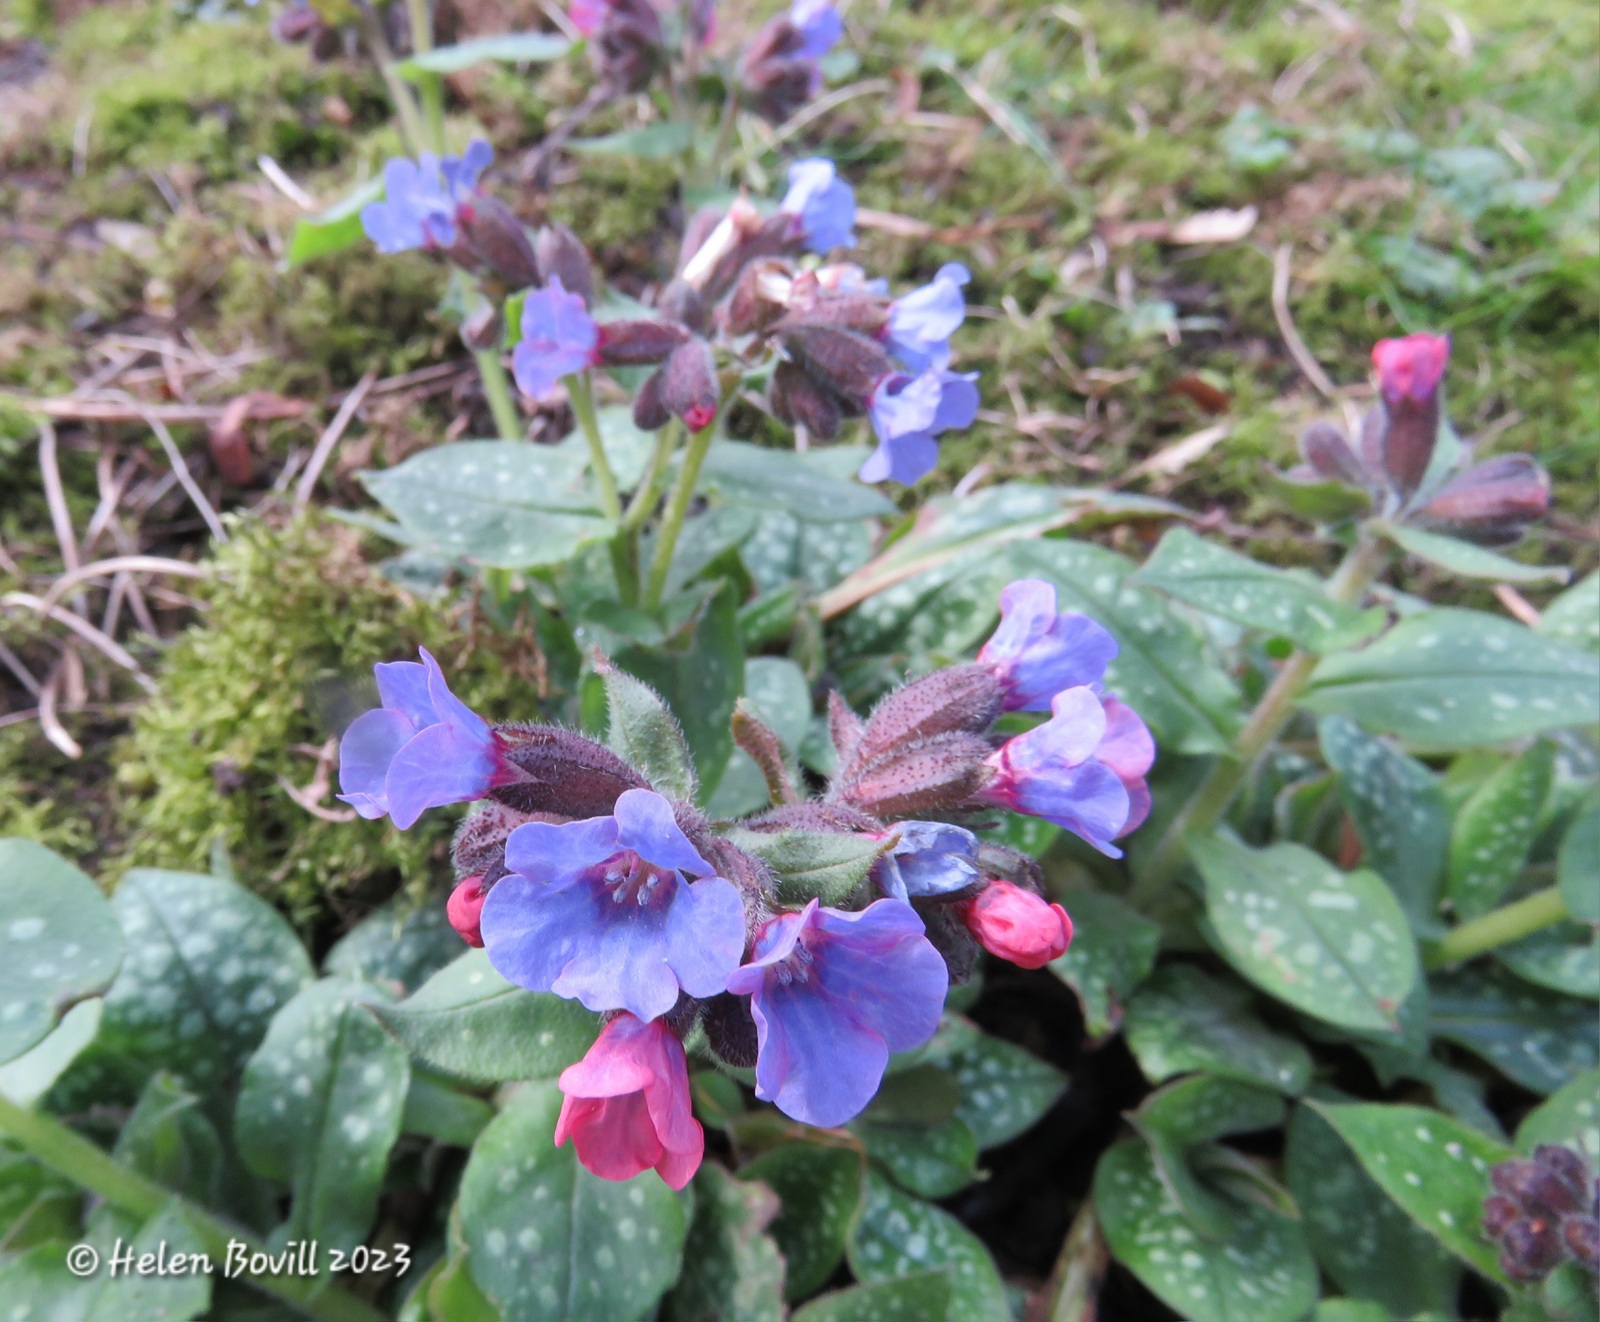 Pulmonaria growing in the Quaker Burial Ground - a good source of food for the cemetery wildlife